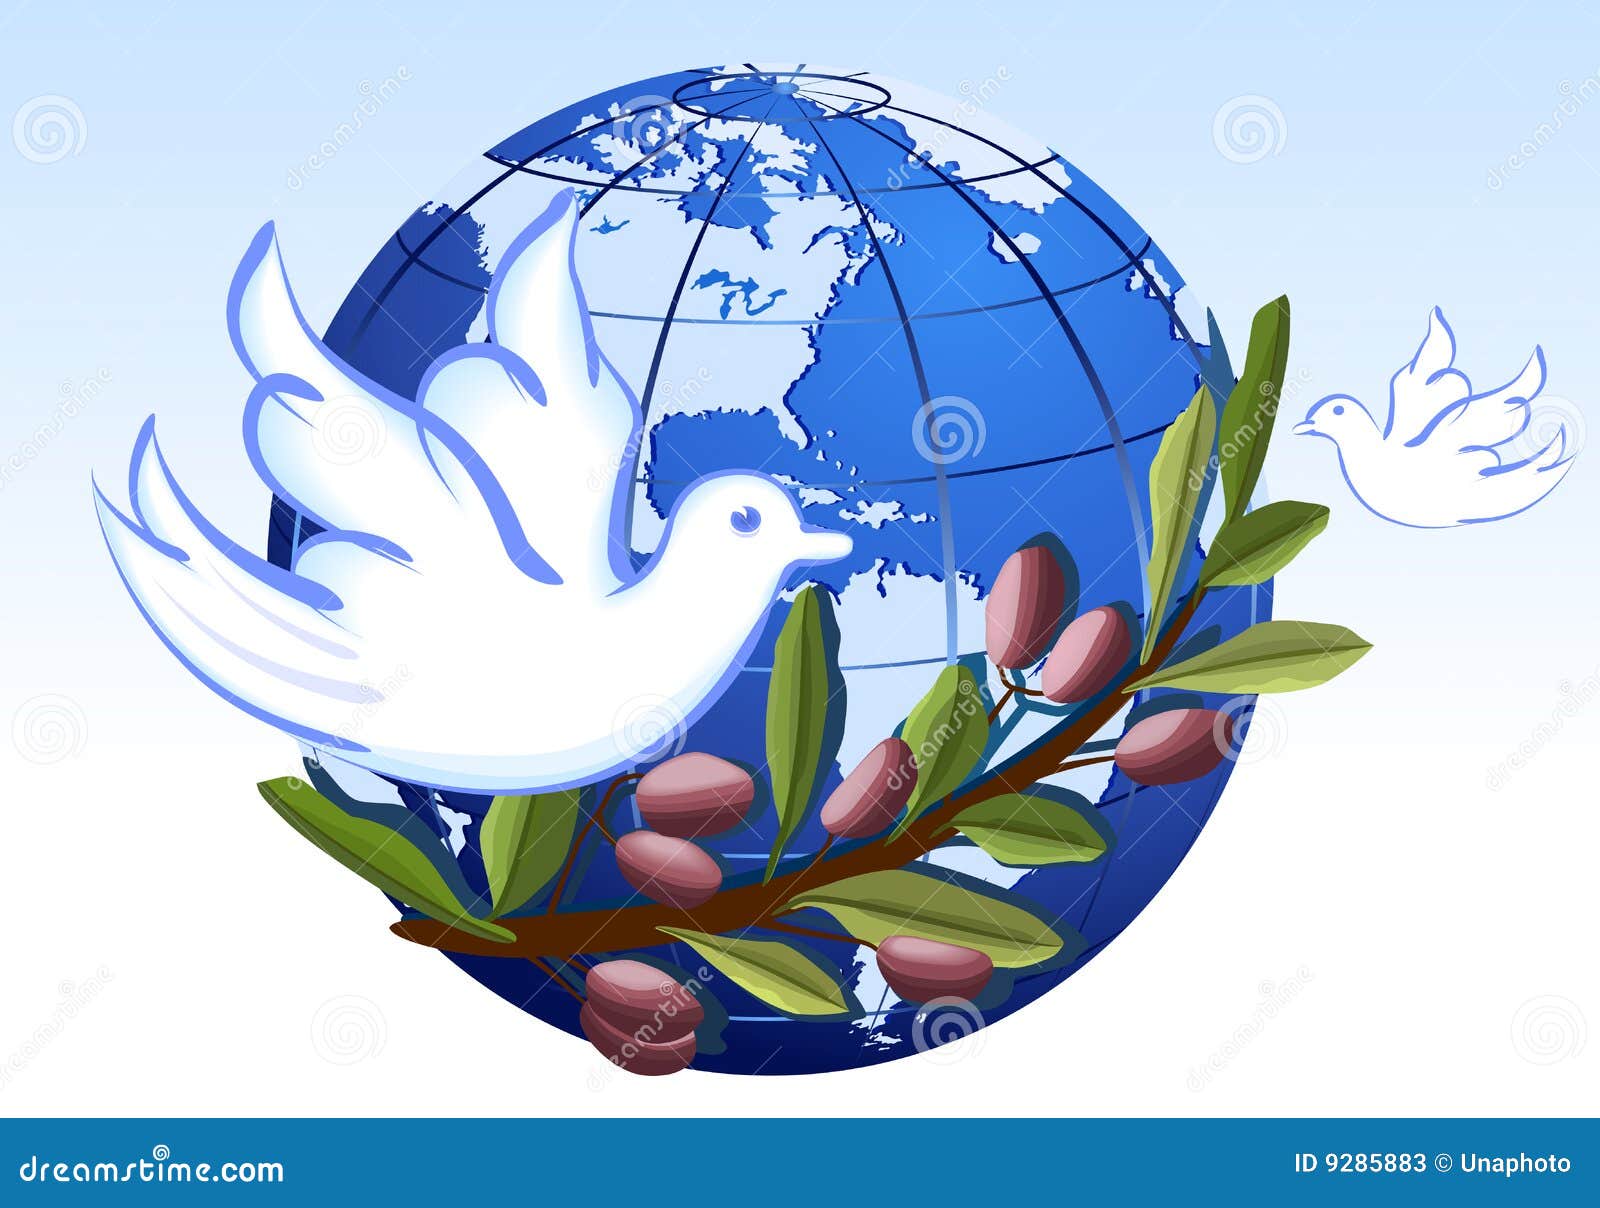 Peace To Earth Stock Illustrations 6 Peace To Earth Stock Illustrations Vectors Clipart Dreamstime